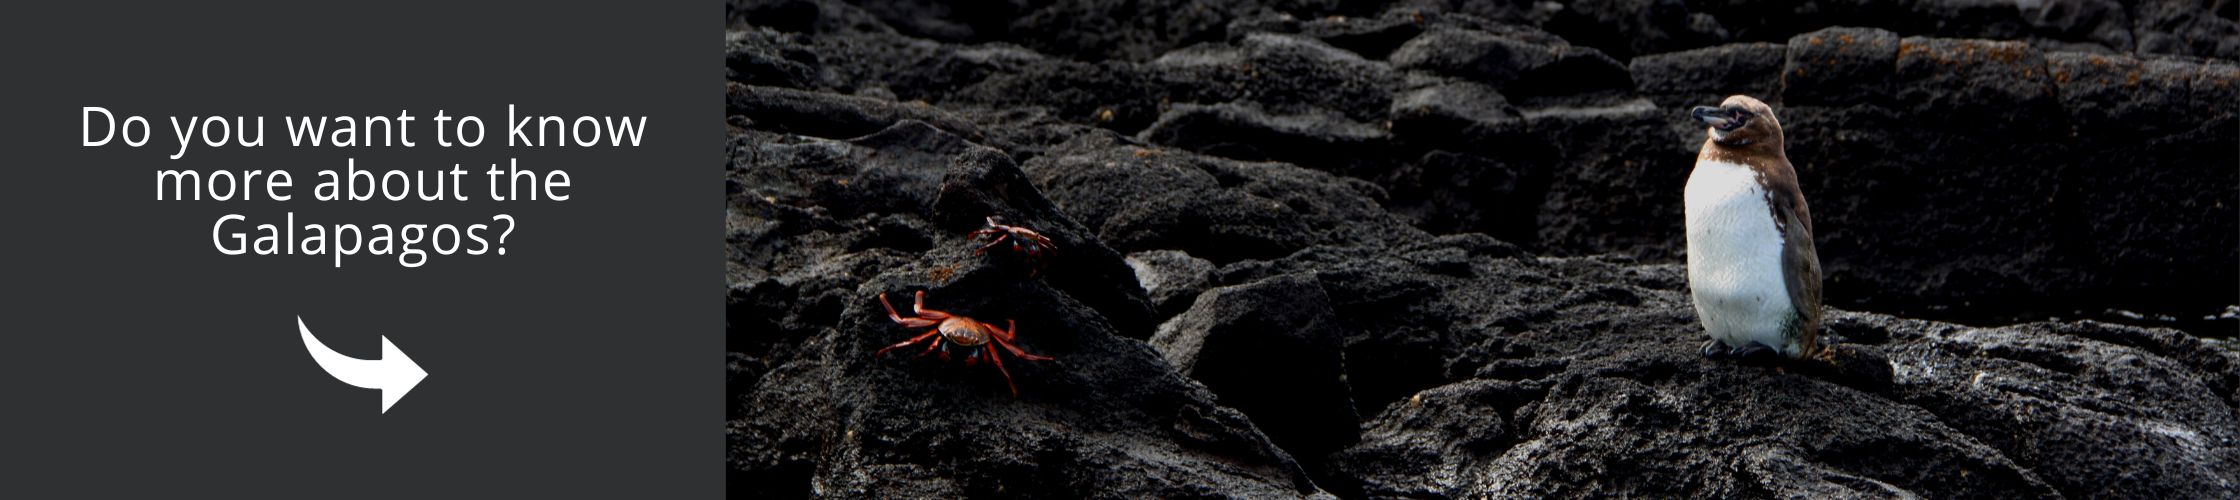 More information about the galapagos islands